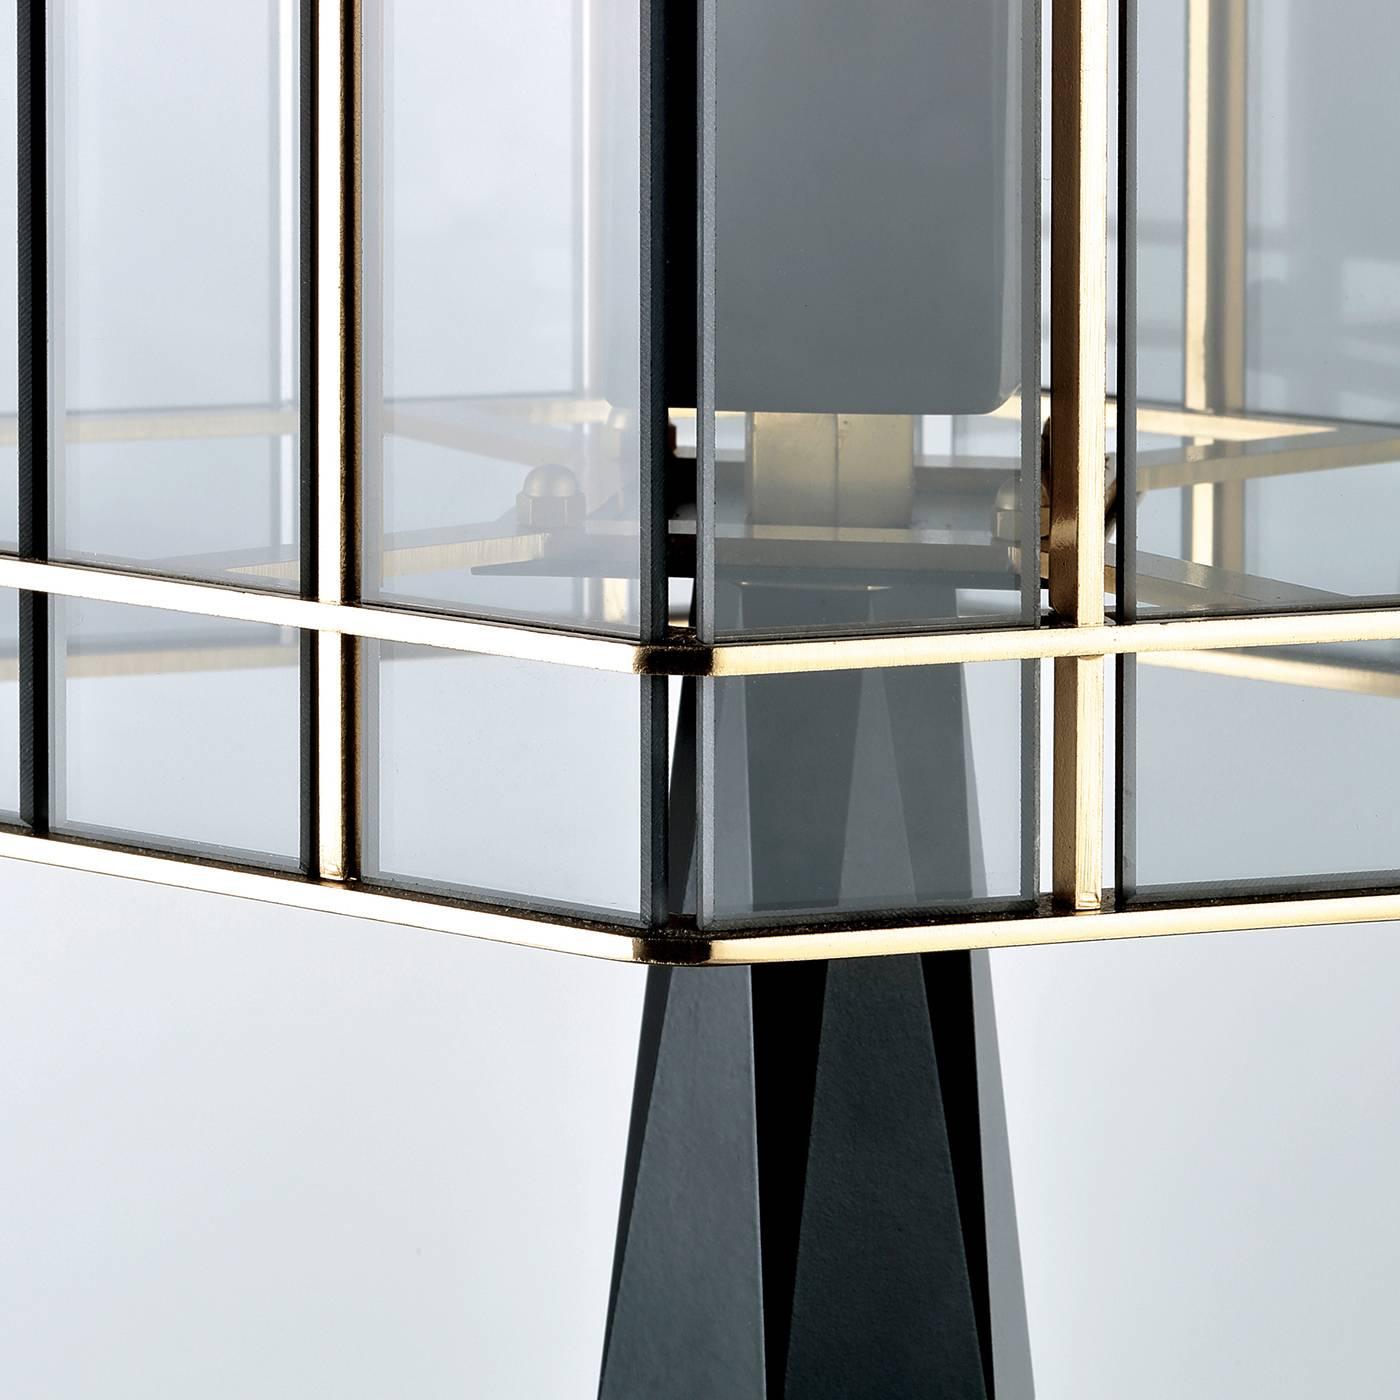 This elegant table lamp features a Classic design, reinterpreted with a contemporary sensibility that is inspired by the style of Art Deco home decor. The result is a timeless piece that will complement any interior and can be combined with other